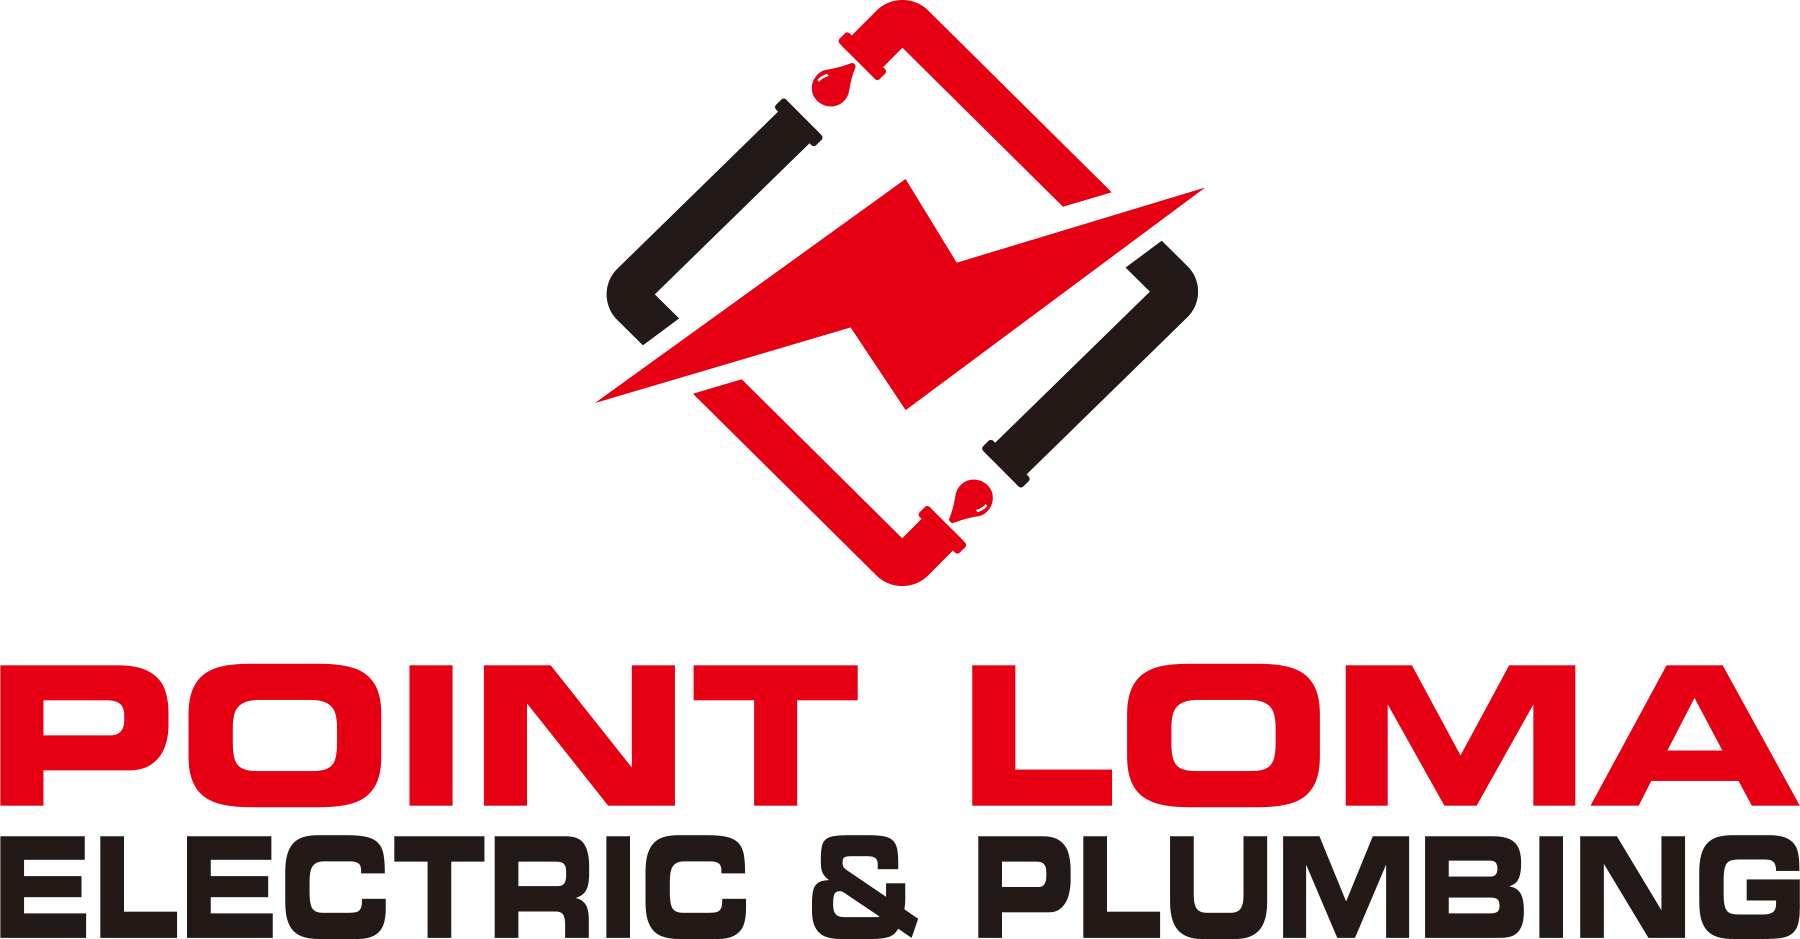 Point Loma Electric and Plumbing Logo